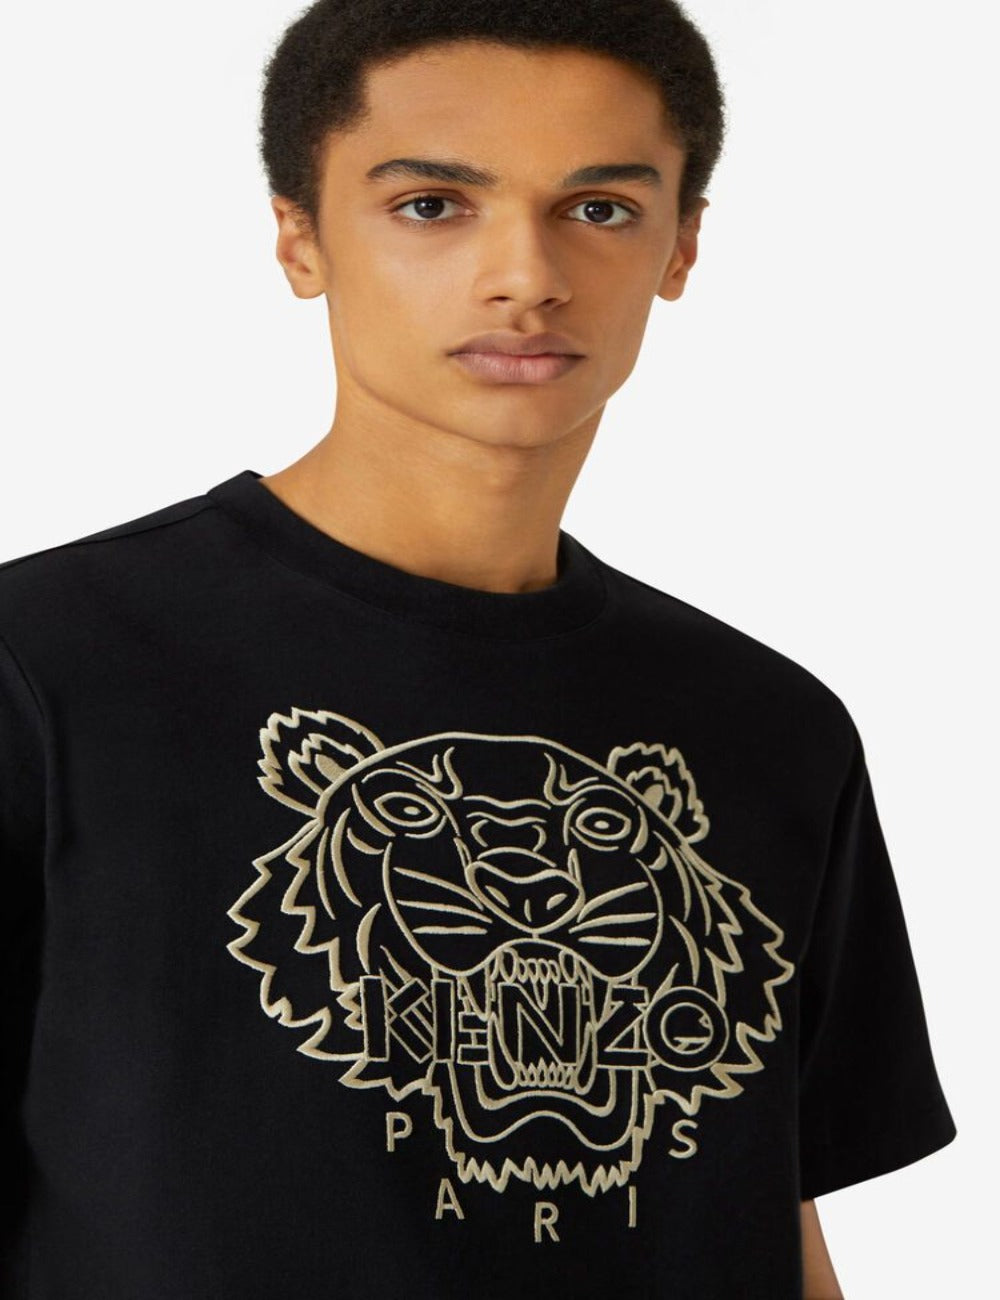 Kenzo Tiger loose-fitting Embroidered T-shirt ( New Design ) - Shop Streetwear, Sneakers, Slippers and Gifts online | Malaysia - The Factory KL